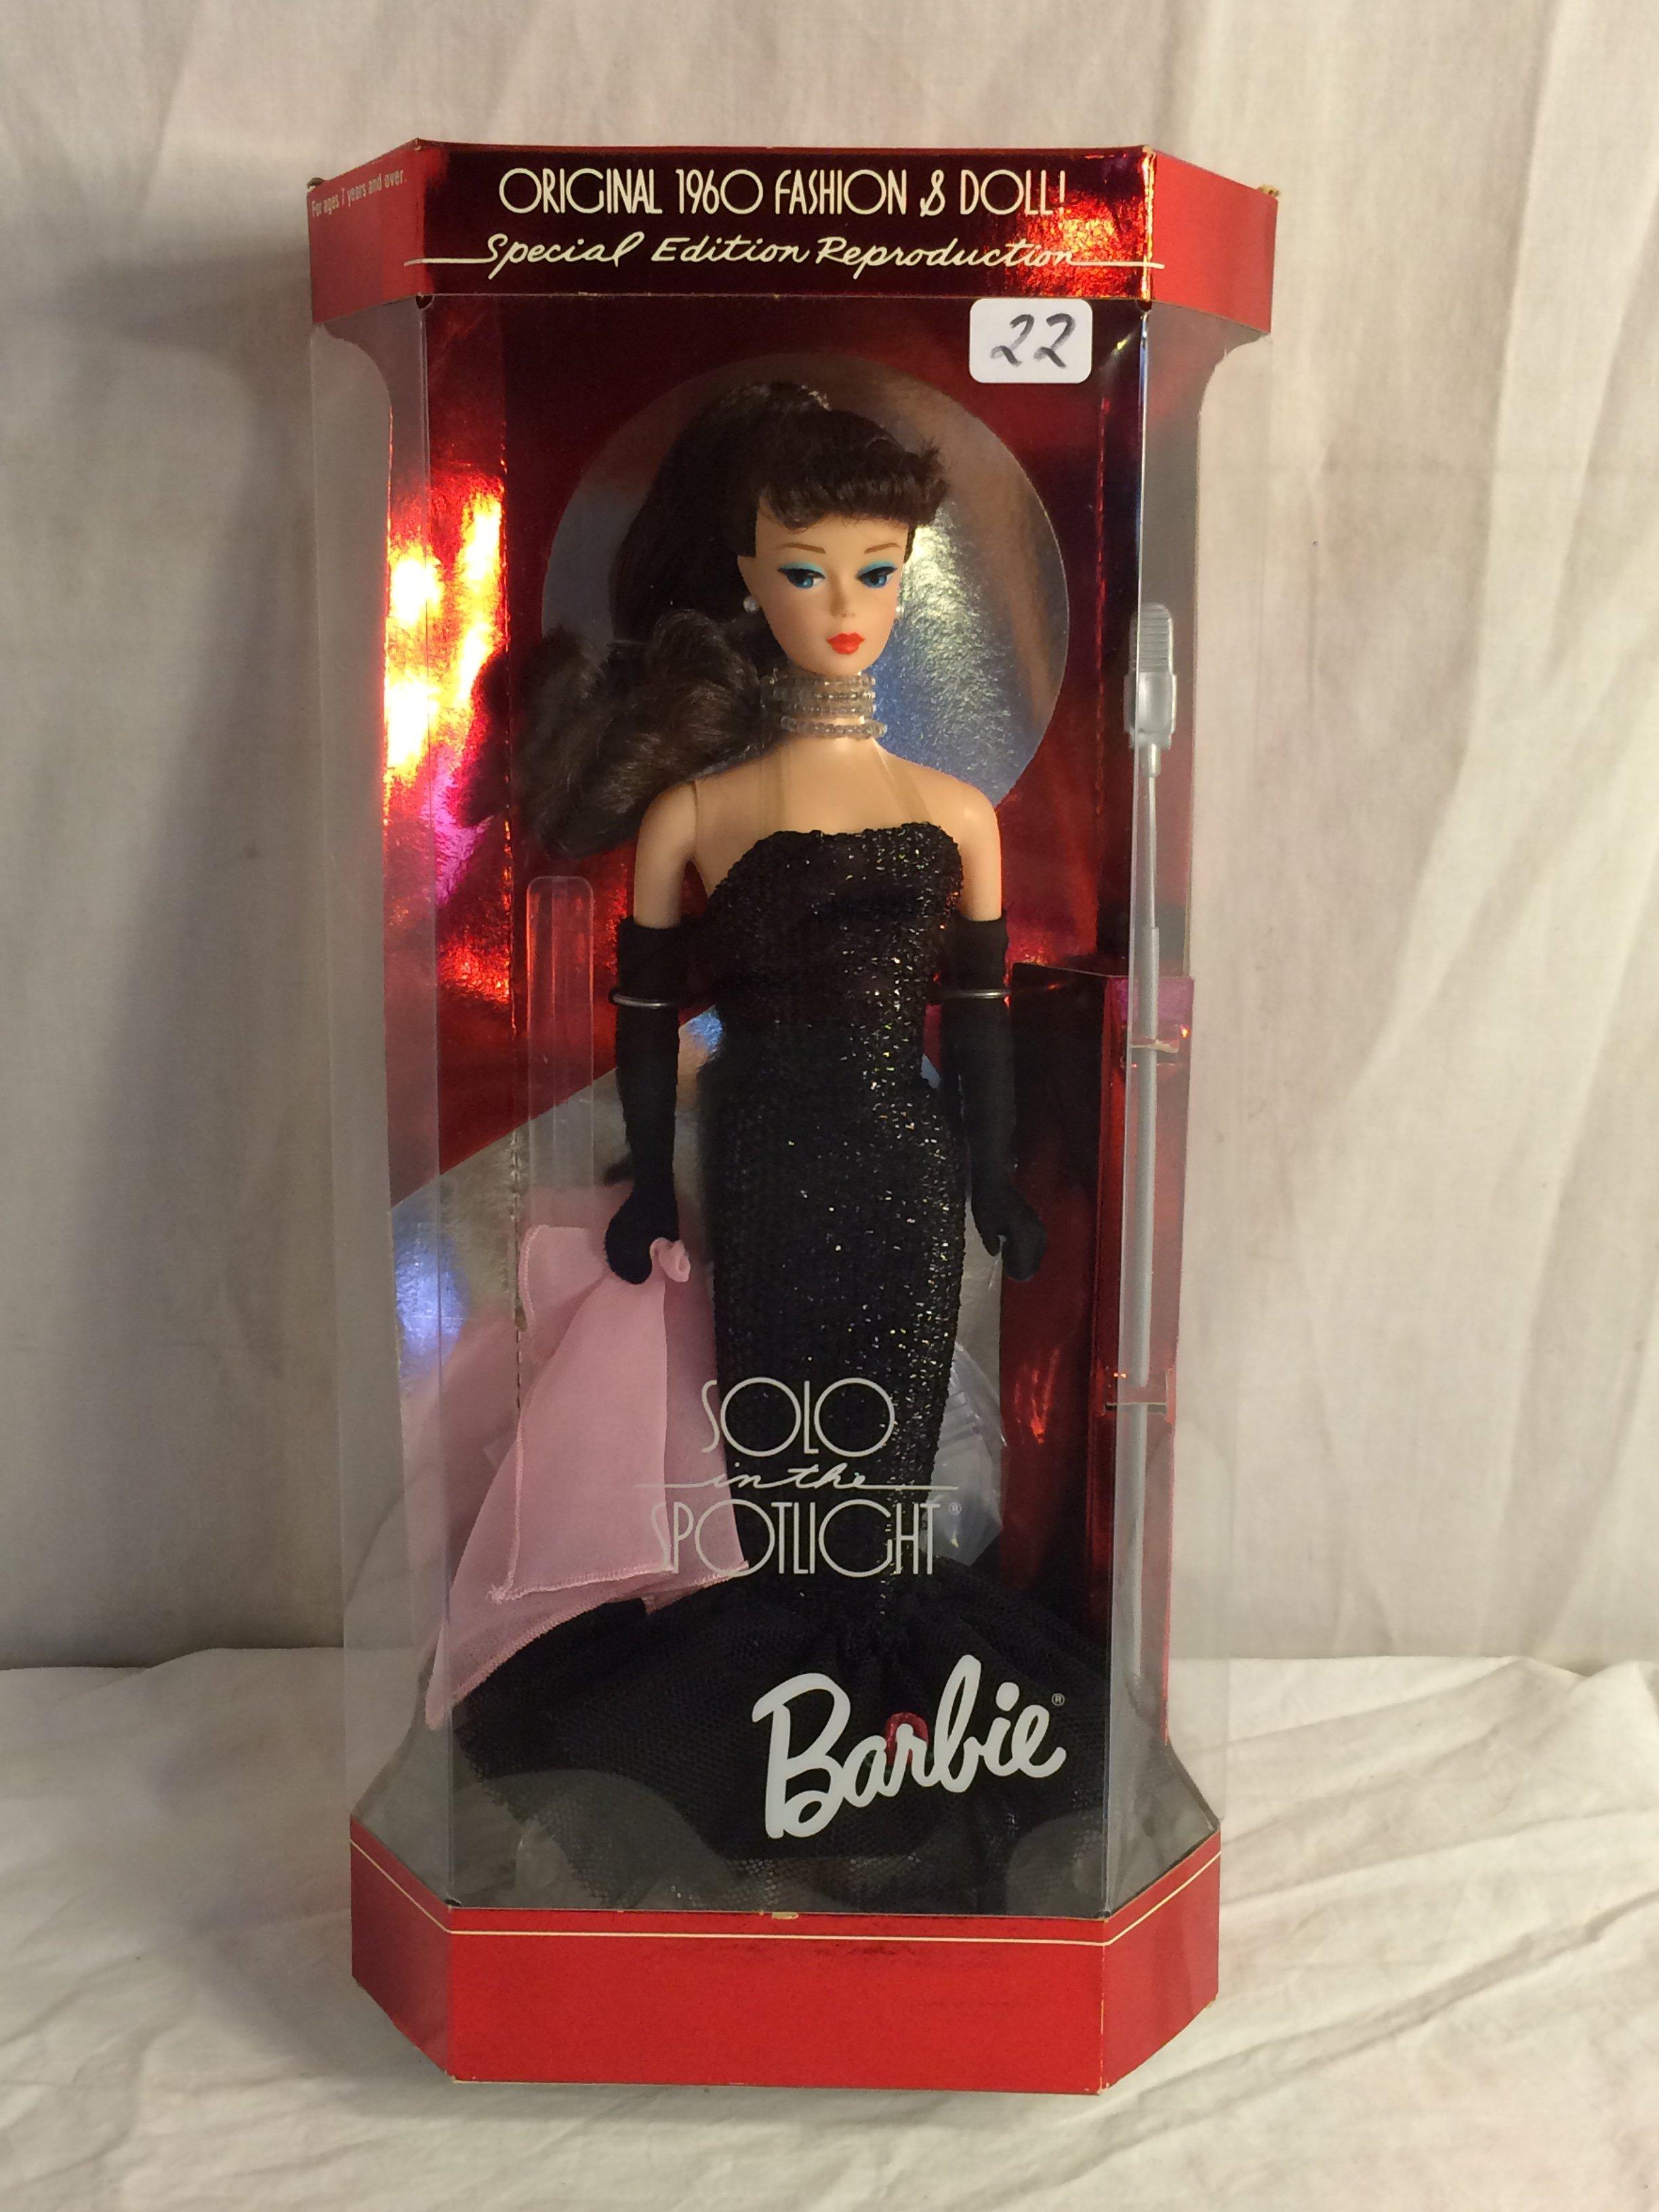 Collector Mattel Barbie Doll Solo In The Spotlight 1960 Doll Reproduction 12.3/4" tall By 6.5"W Box